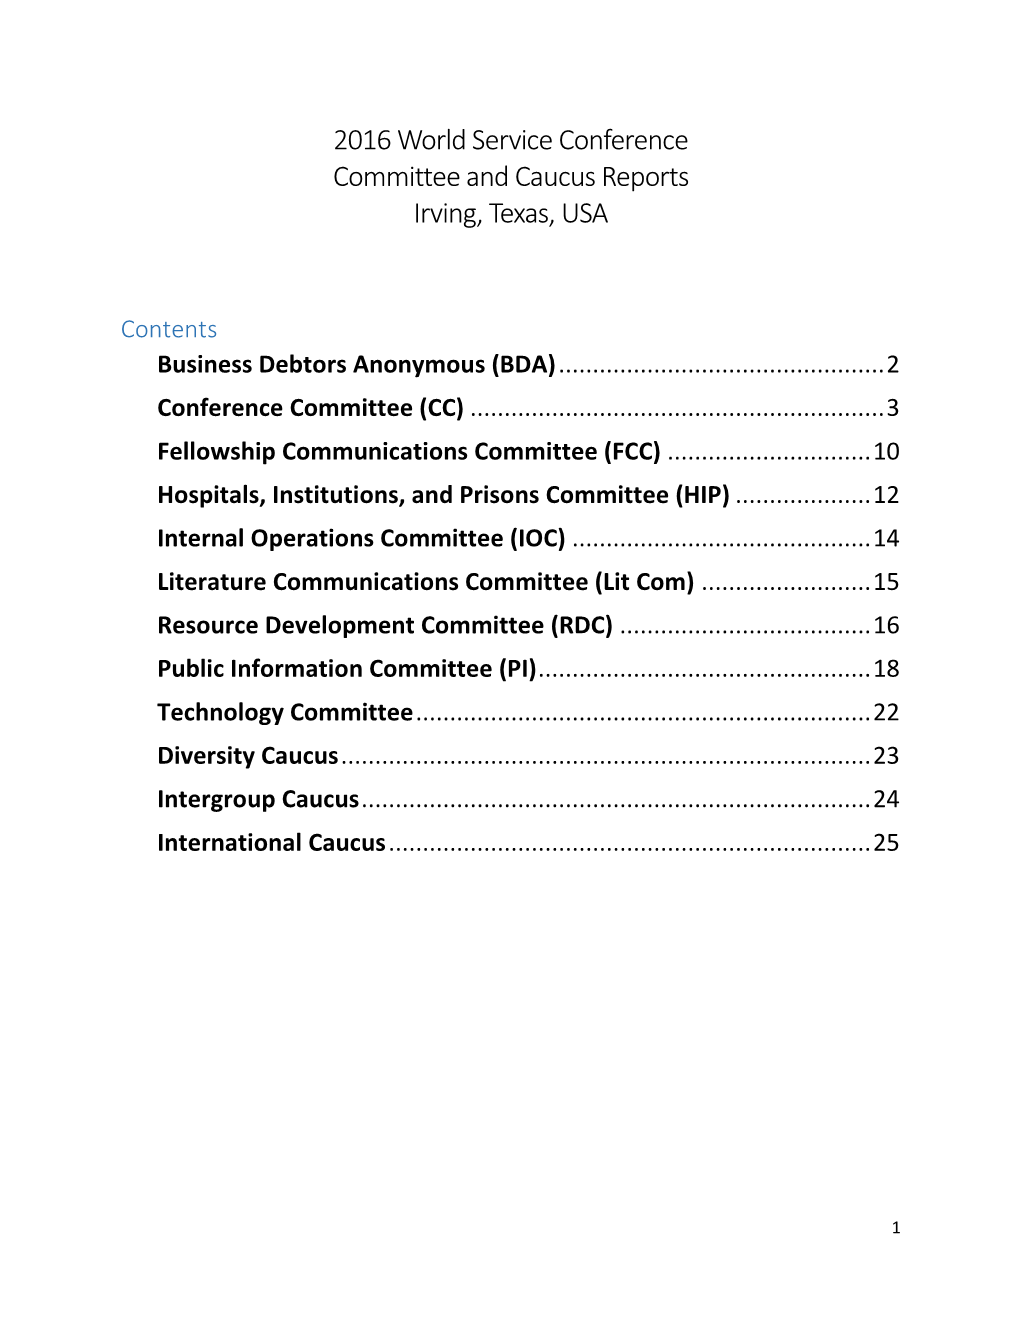 2016 World Service Conference Committee and Caucus Reports Irving, Texas, USA